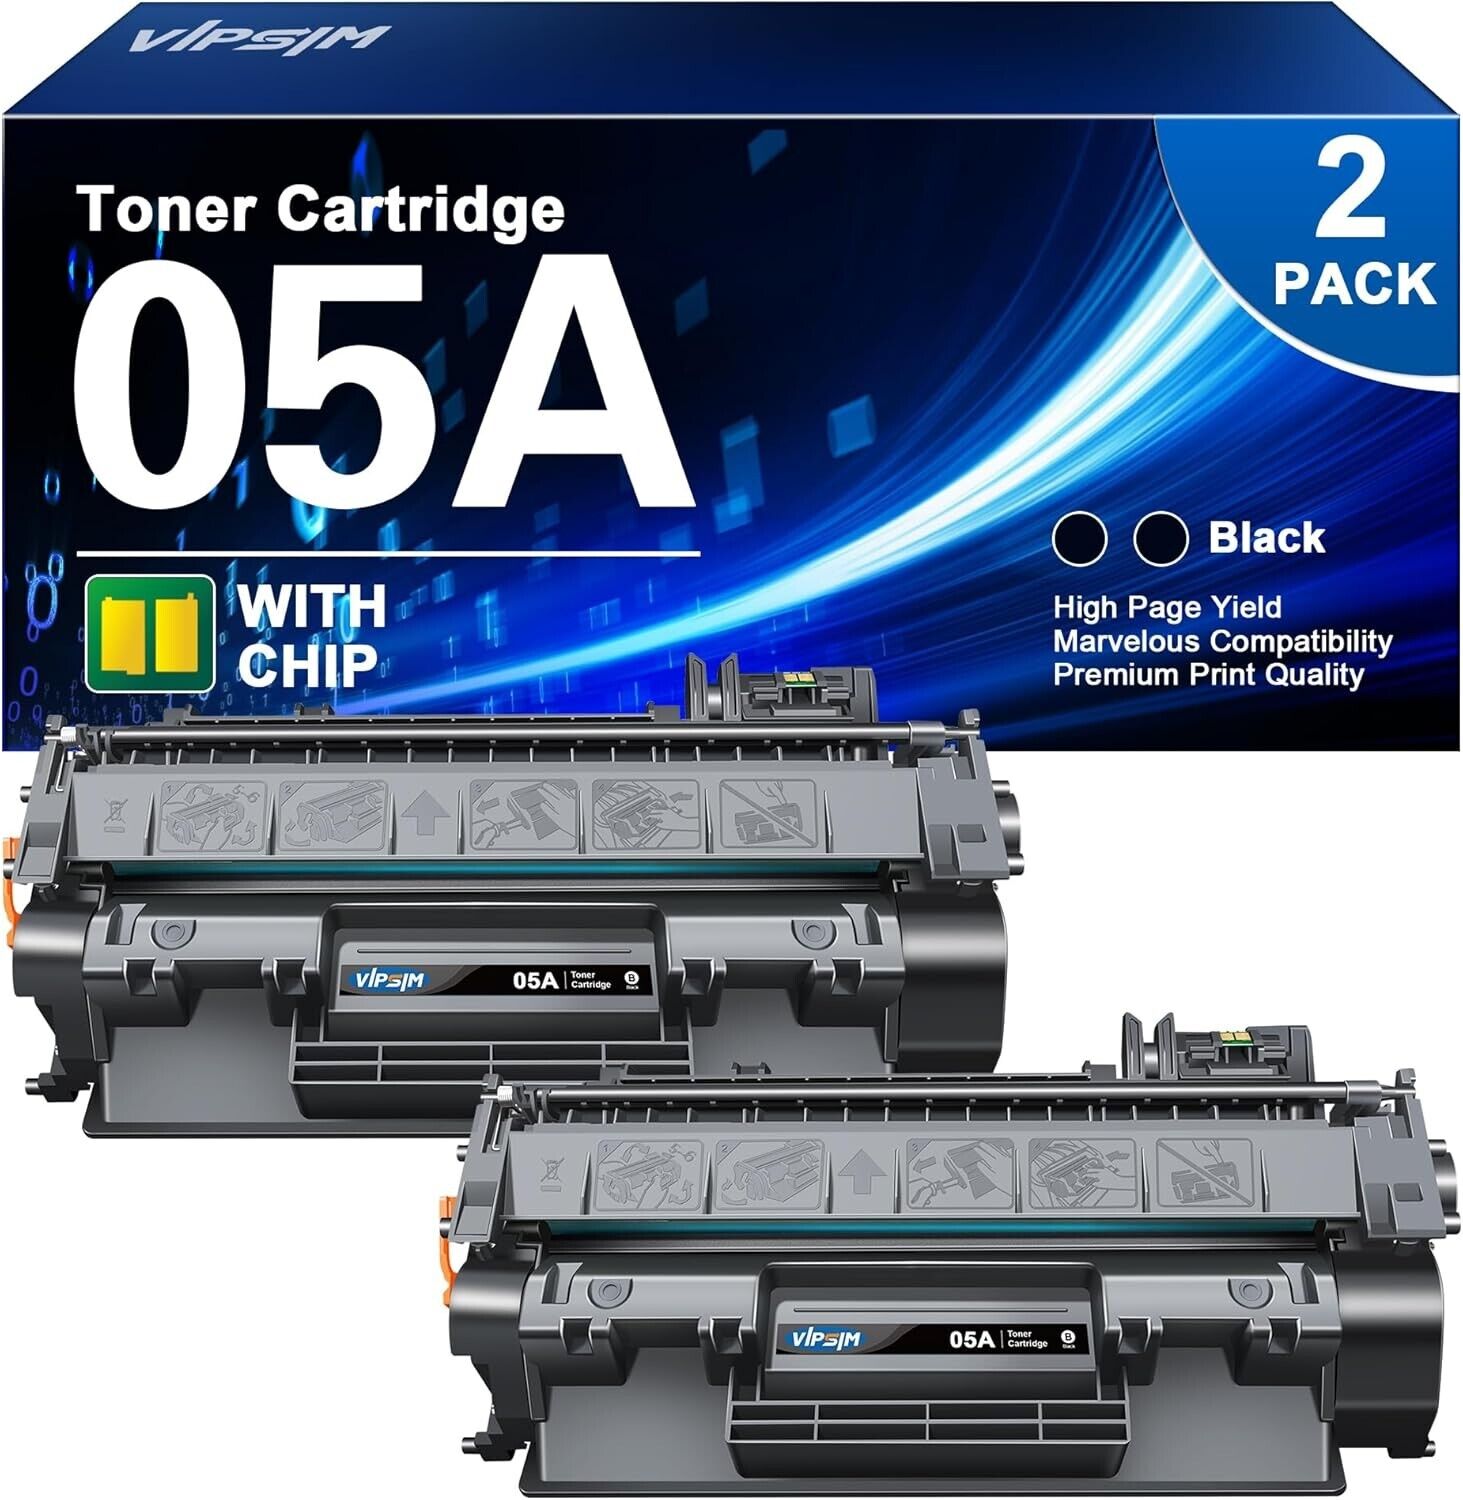 05A CE505A Toner Cartridge - Replacement for HP 05A Toner Cartridge Black for...